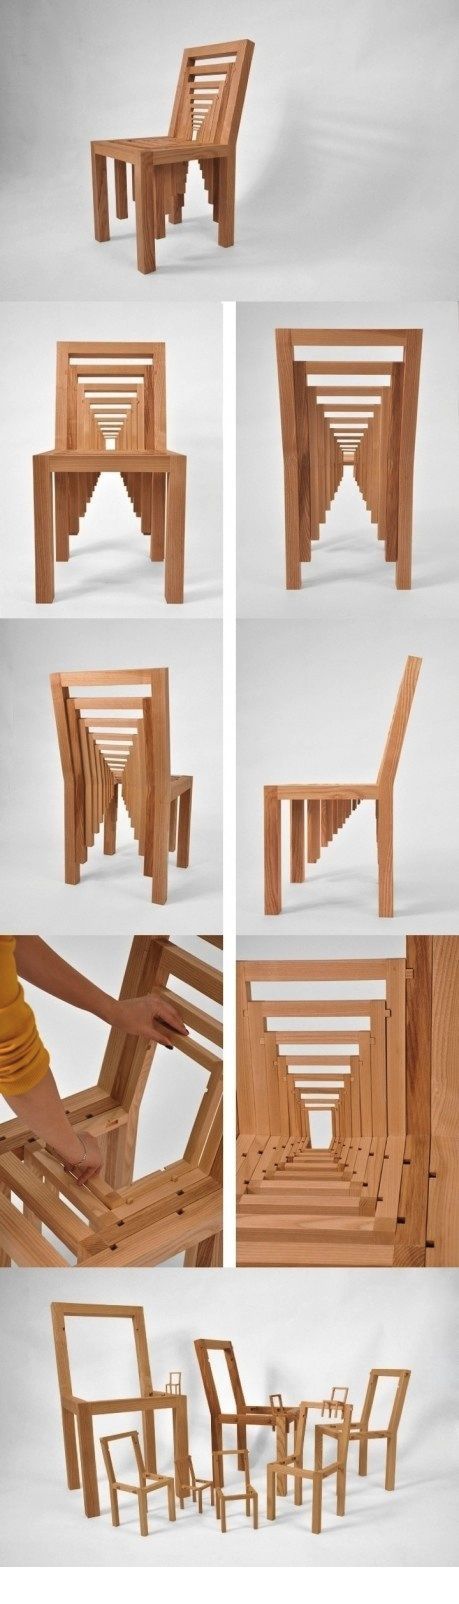 Inception chair.